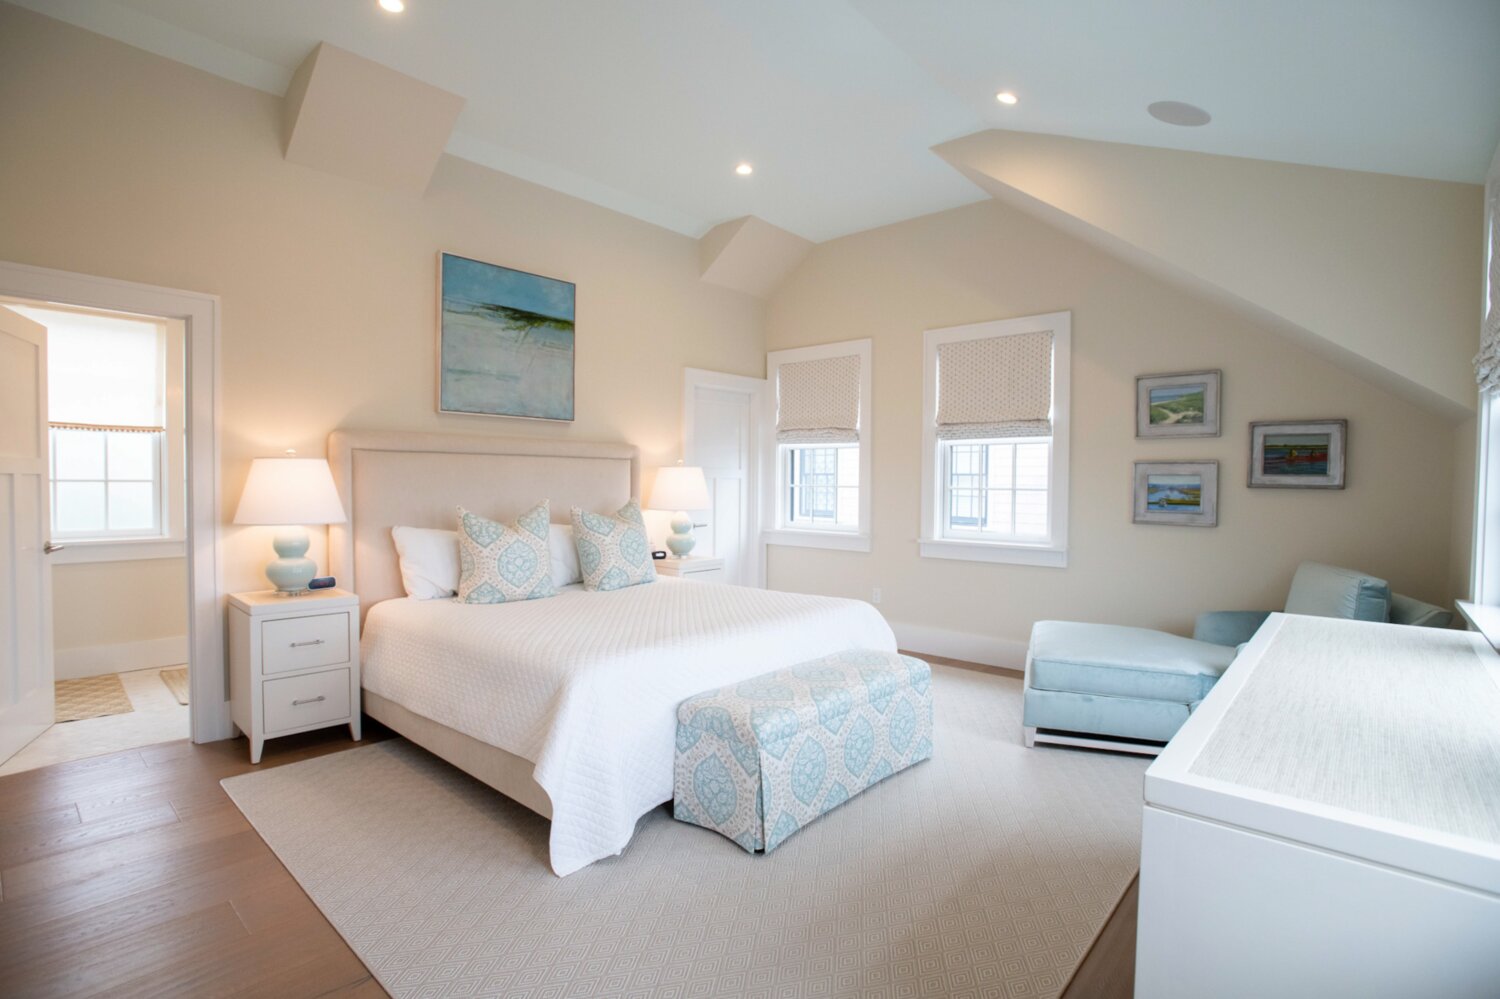 The east-facing bedroom suite has cathedral ceilings, a quaint reading nook and built-in cabinet.